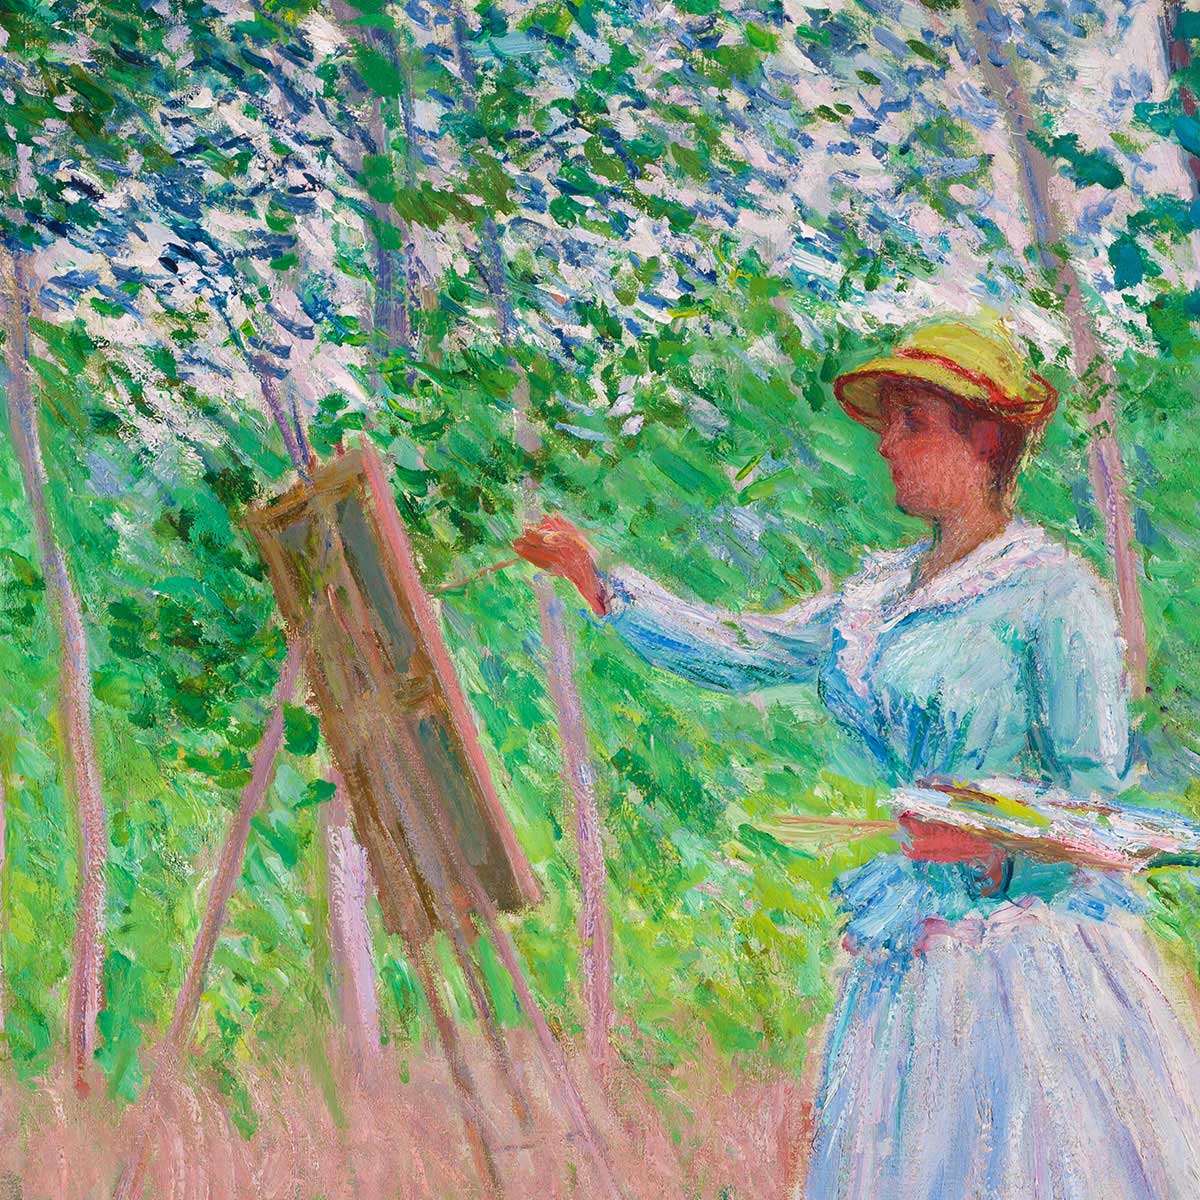 Blanche Hoschedé at her Easel with Susanne Hoschedé Reading by Claude Monet Art Exhibition Poster